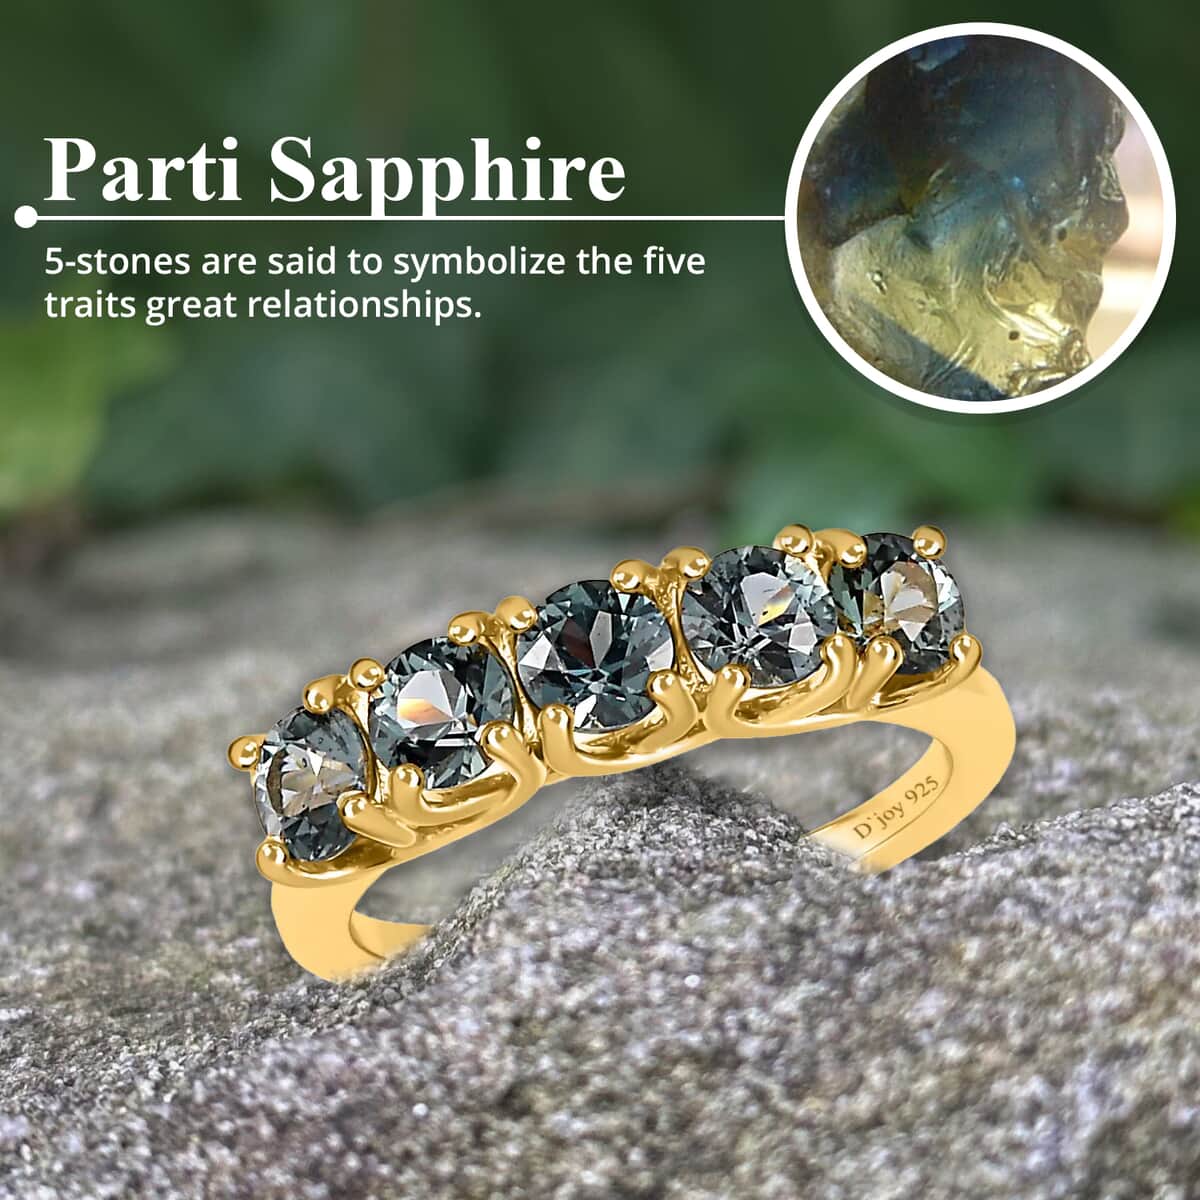 Parti Sapphire Ring, Sapphire 5 Stone Ring, Half Eternity Band Ring, Vermeil YG Over Sterling Silver Ring, Wedding Band For Women 1.75 ctw (Size 5.0) image number 3